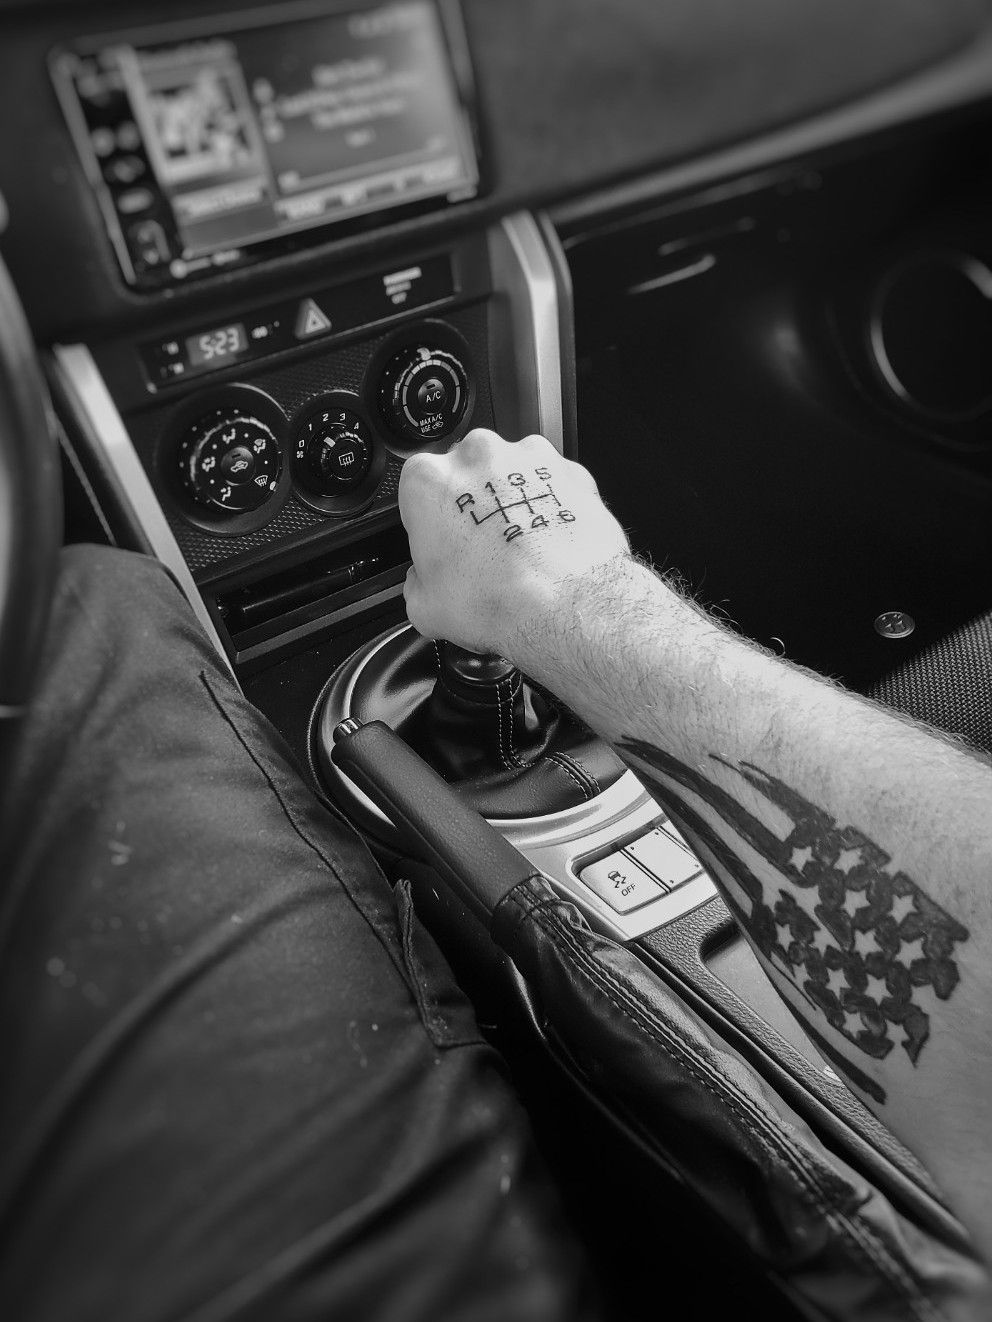 Top 10 6 speed gear shift tattoo ideas and inspiration